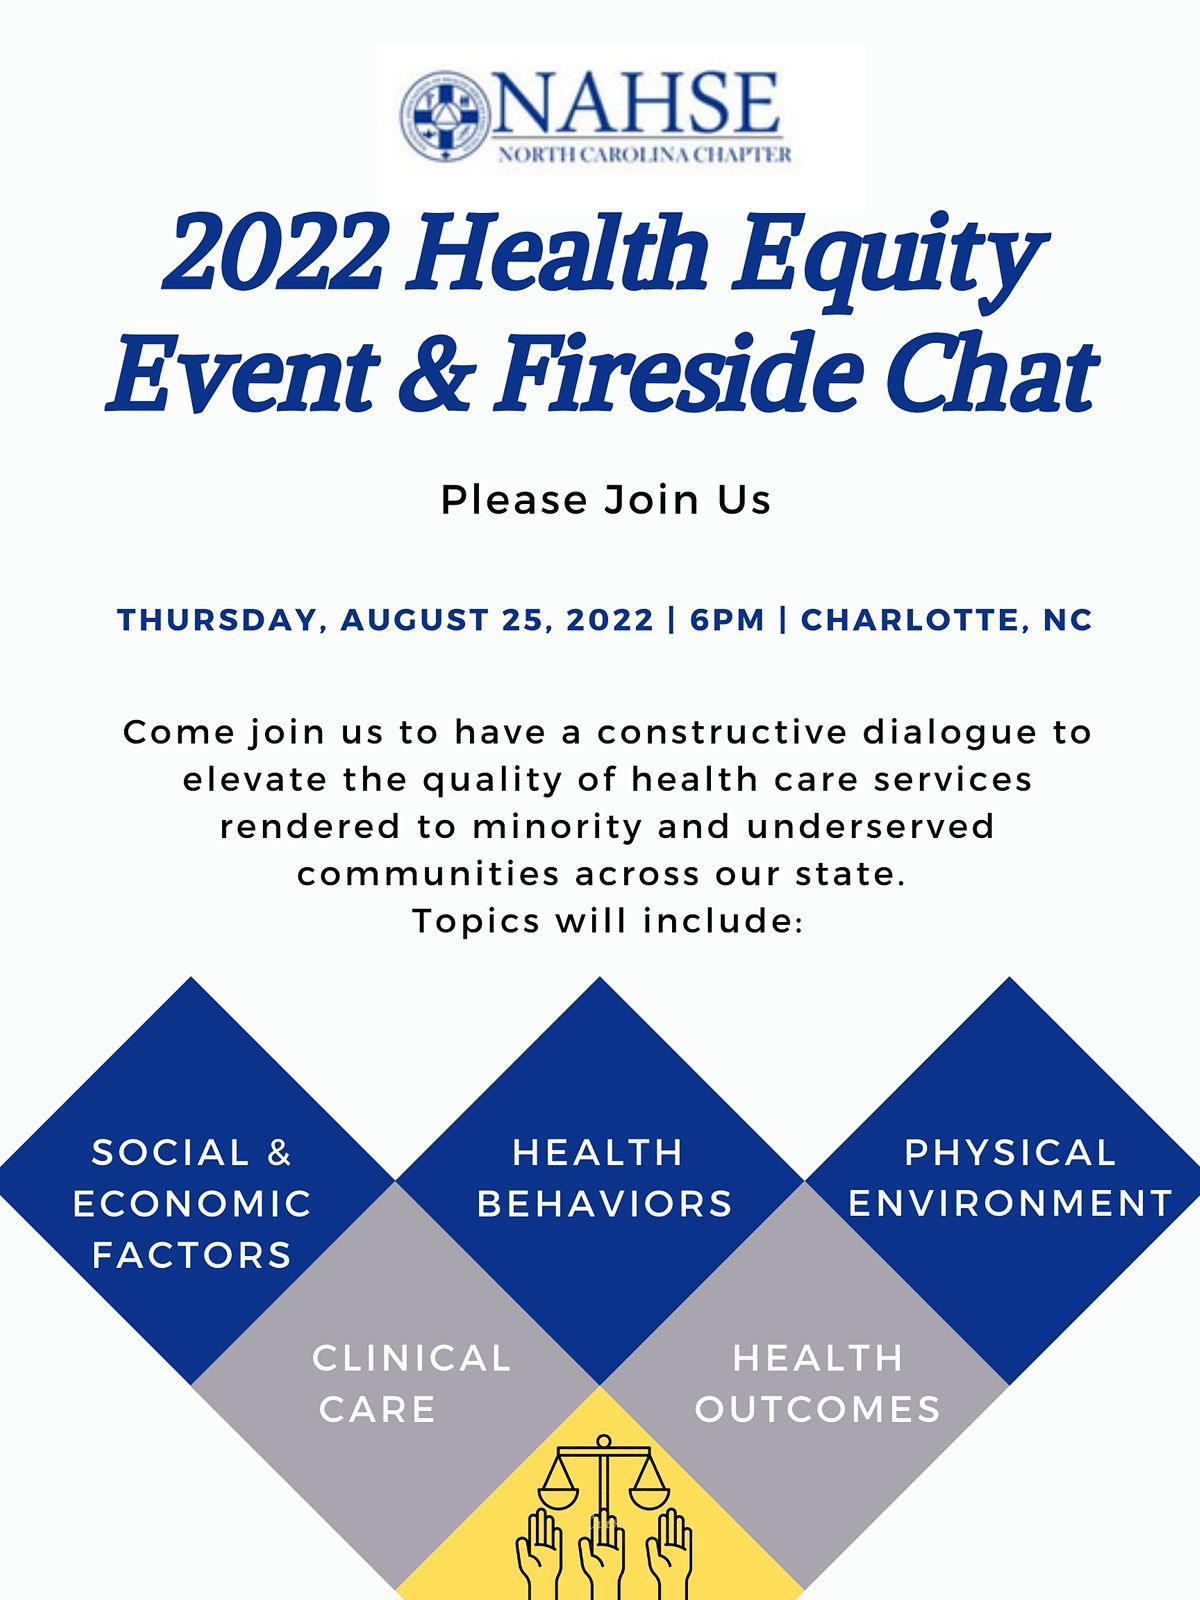 2022 Health Equity Event & Fireside Chat